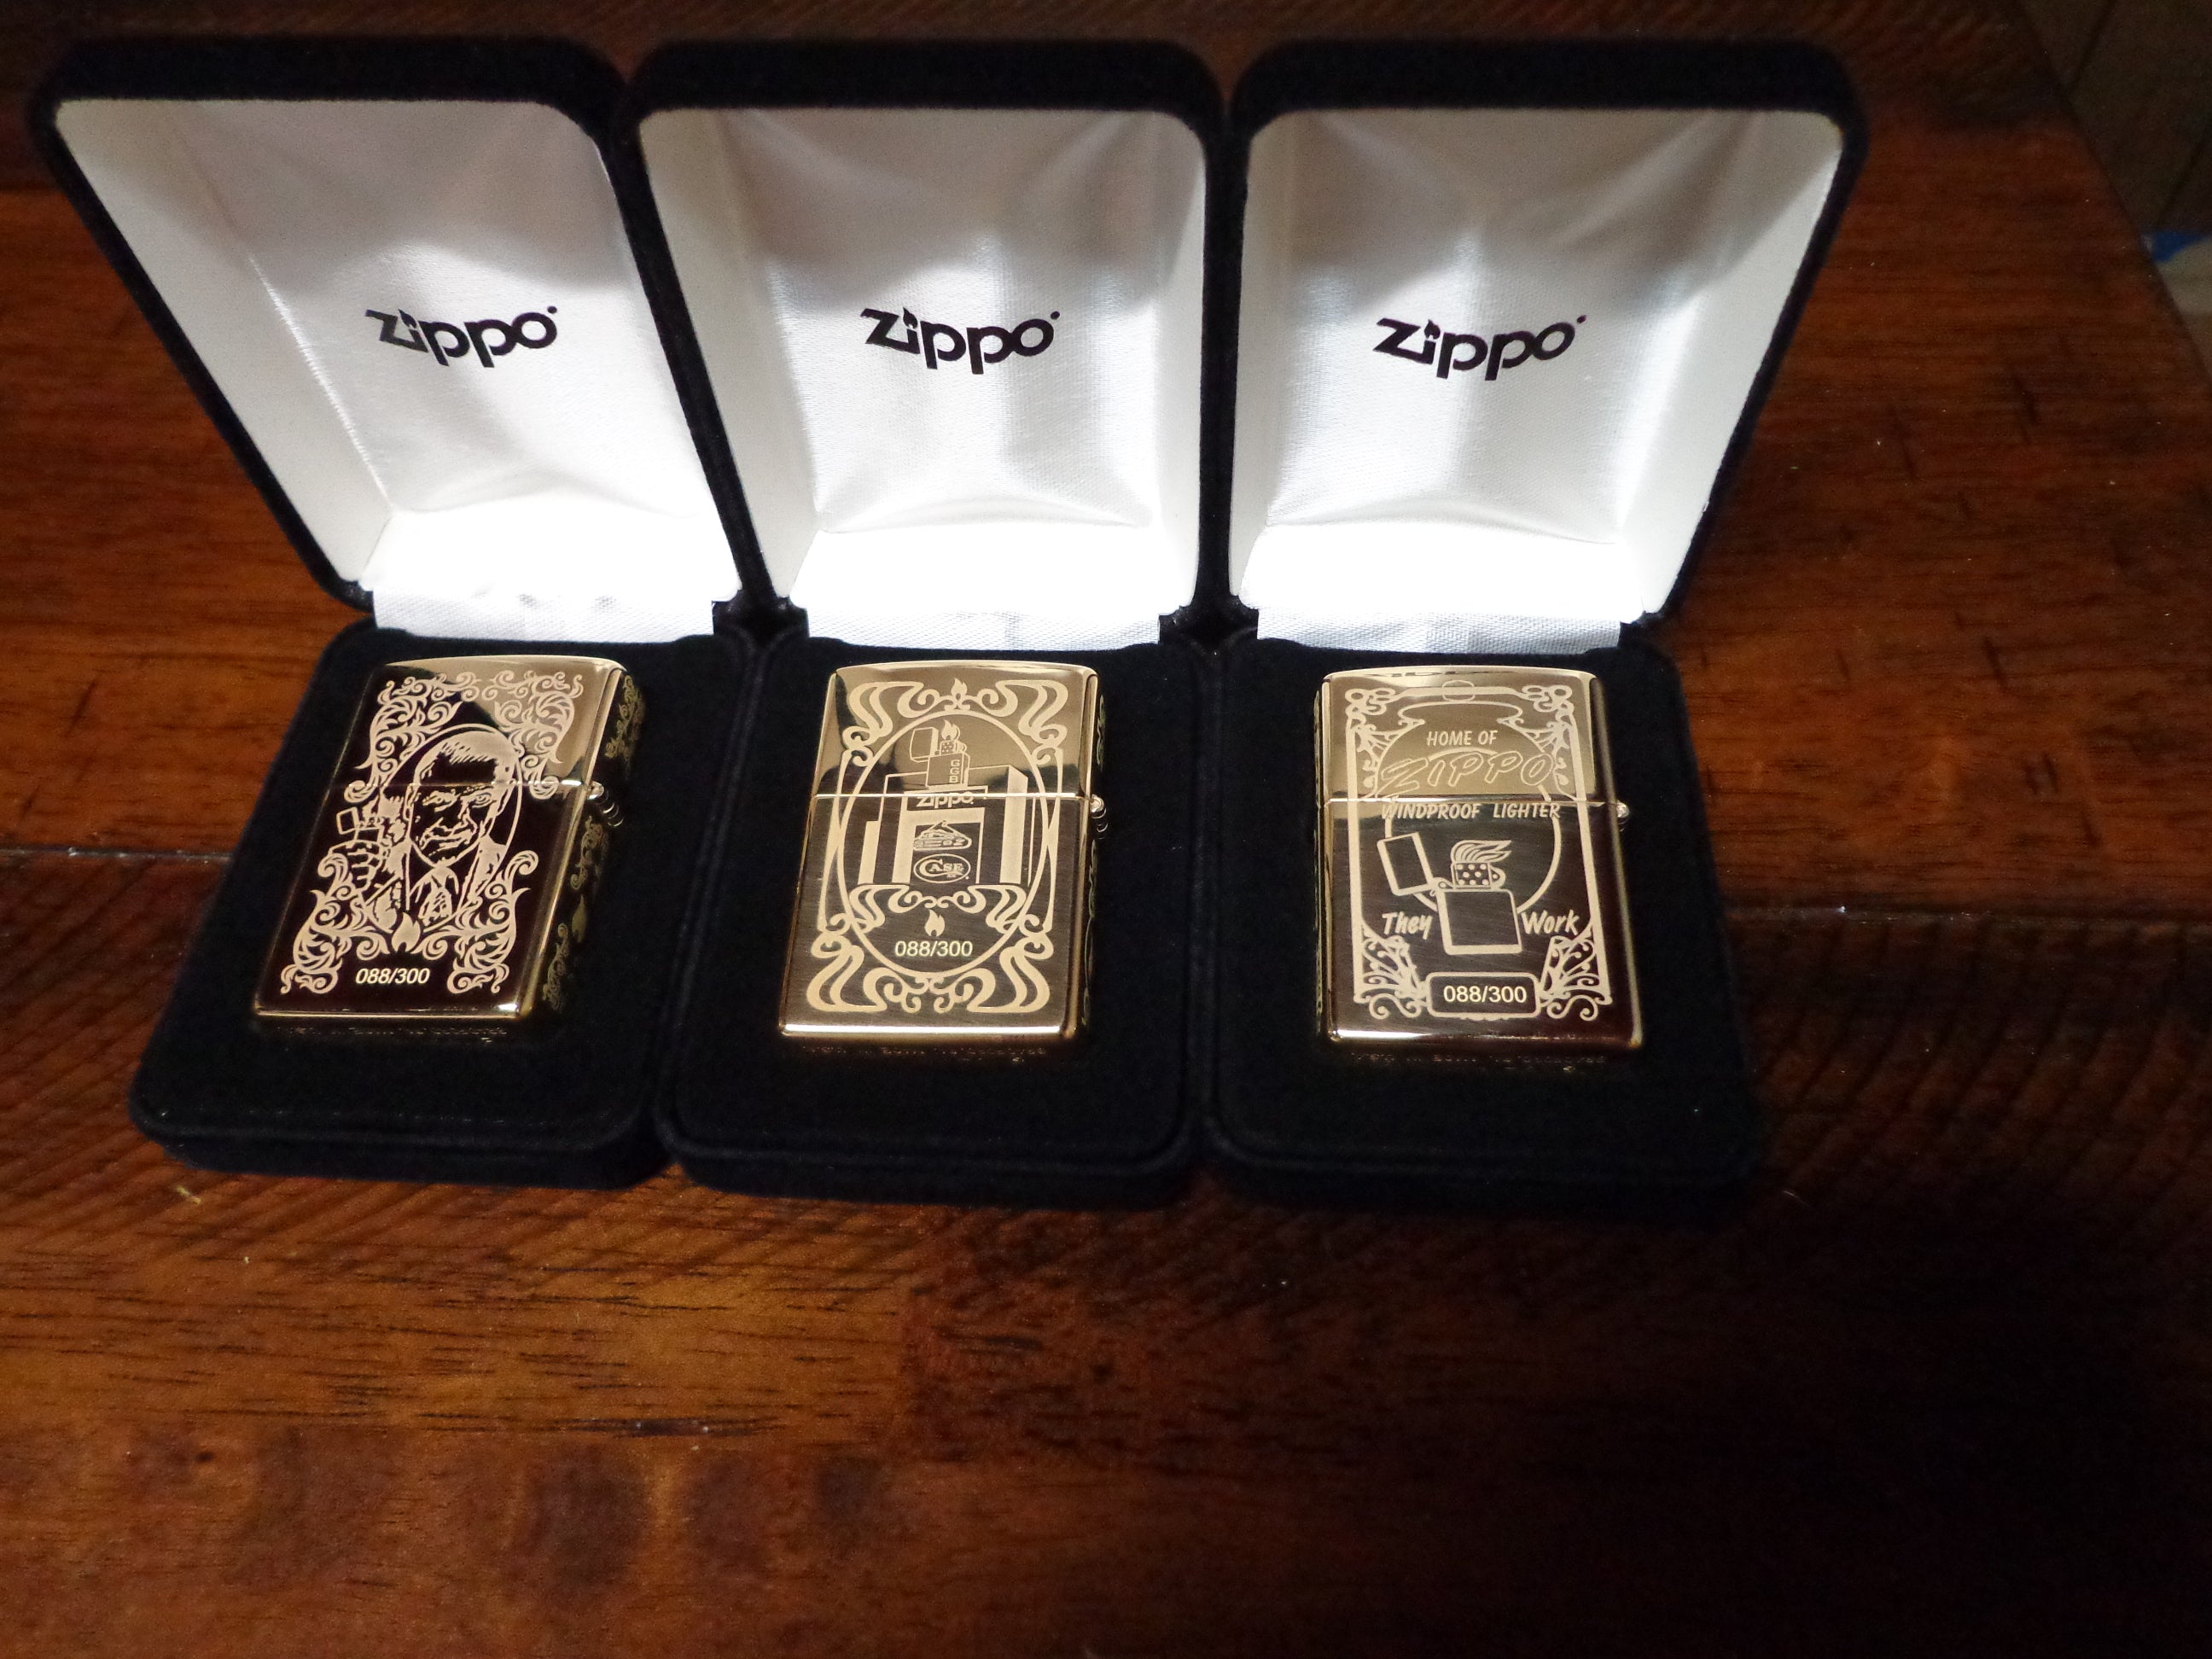 New Zippo Reinspire 3 Lighter set all 3 pieces with matching